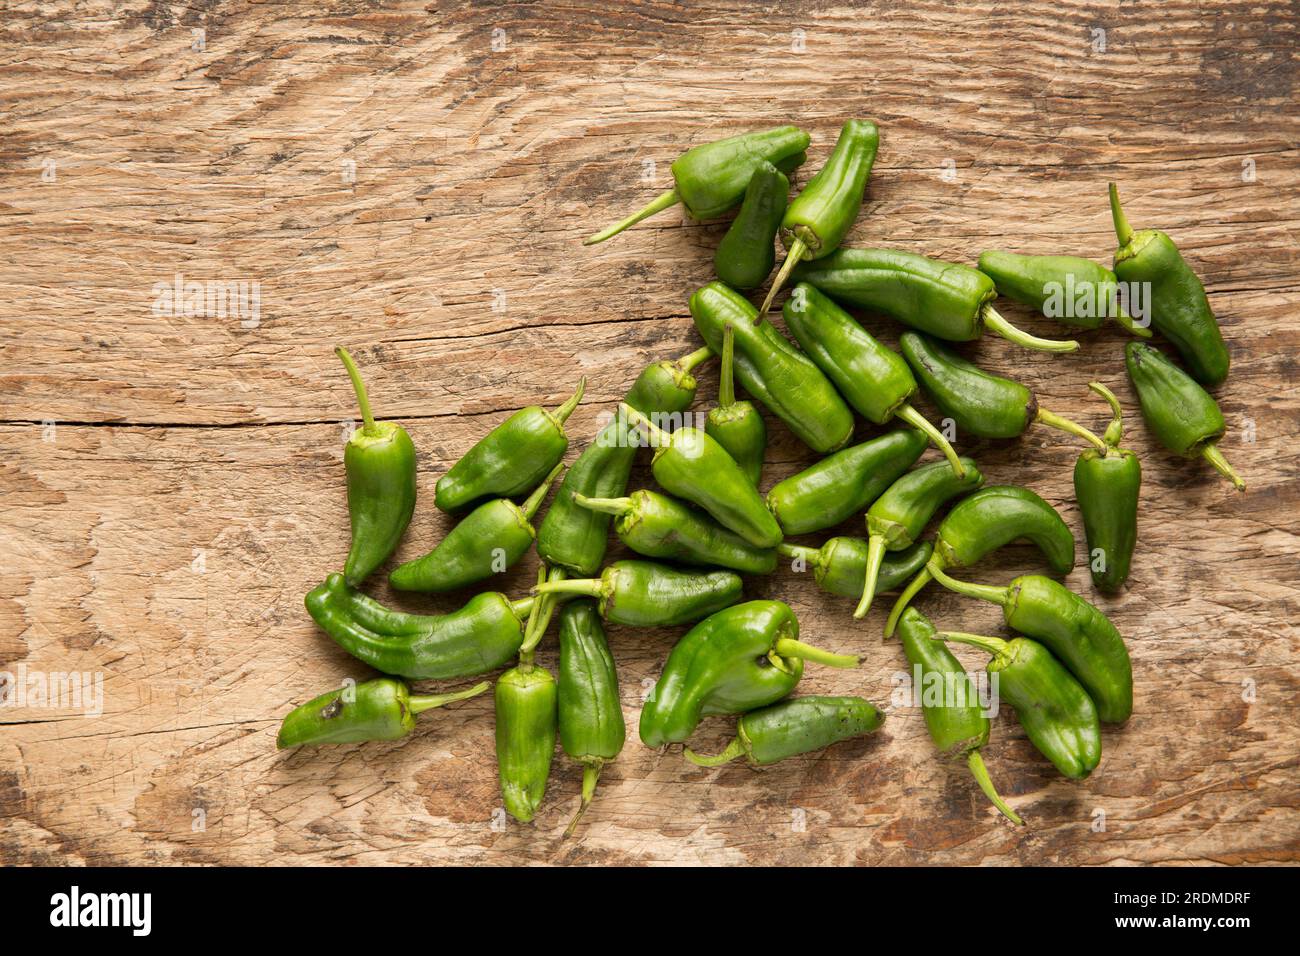 Padron peppers bought from a supermarket and imported to the UK from Morocco. Displayed on a wooden chopping board. England UK GB Stock Photo